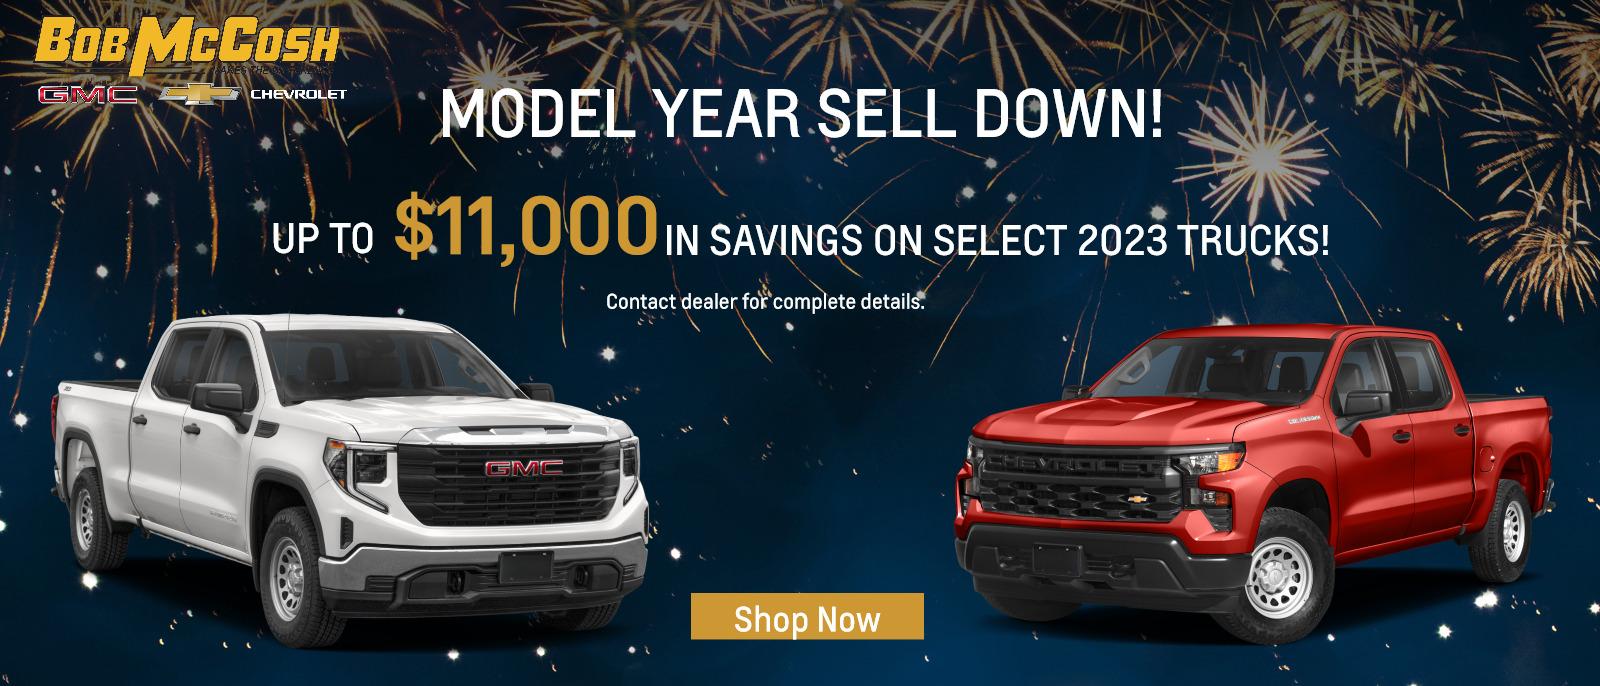 MODEL YEAR SELL DOWN!
Up to $11,000 In Savings On Select 2023 Trucks!
Contact dealer for complete details.